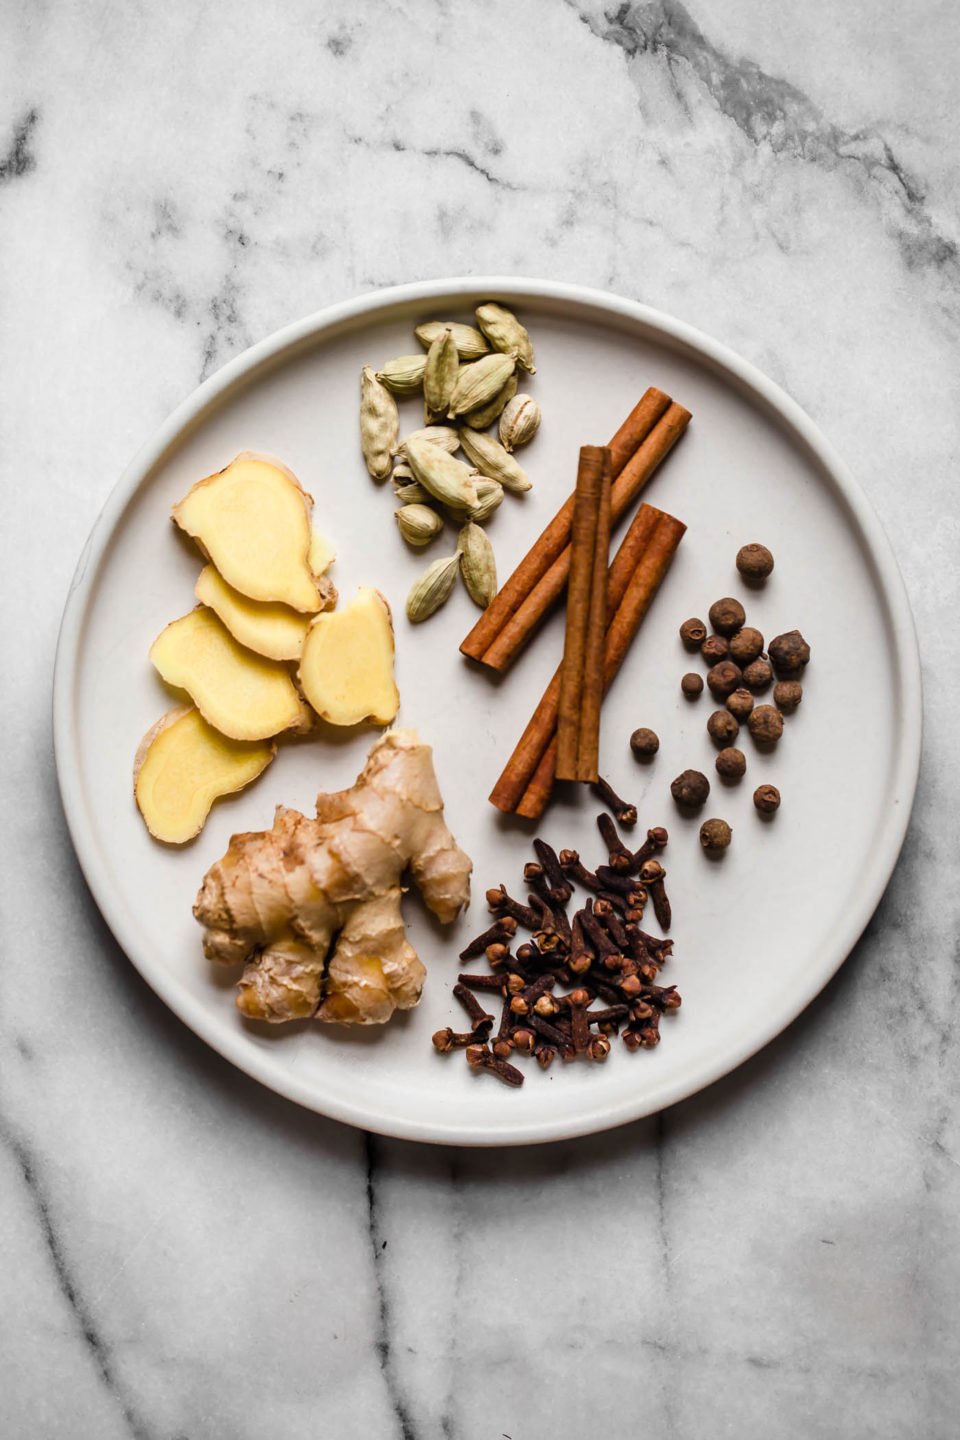 Homemade chai spice ingredients arranged on a white ceramic plate: cinnamon, cardamom, ginger, allspice, cloves, & nutmeg. The plate sits atop a white & gray marble surface.